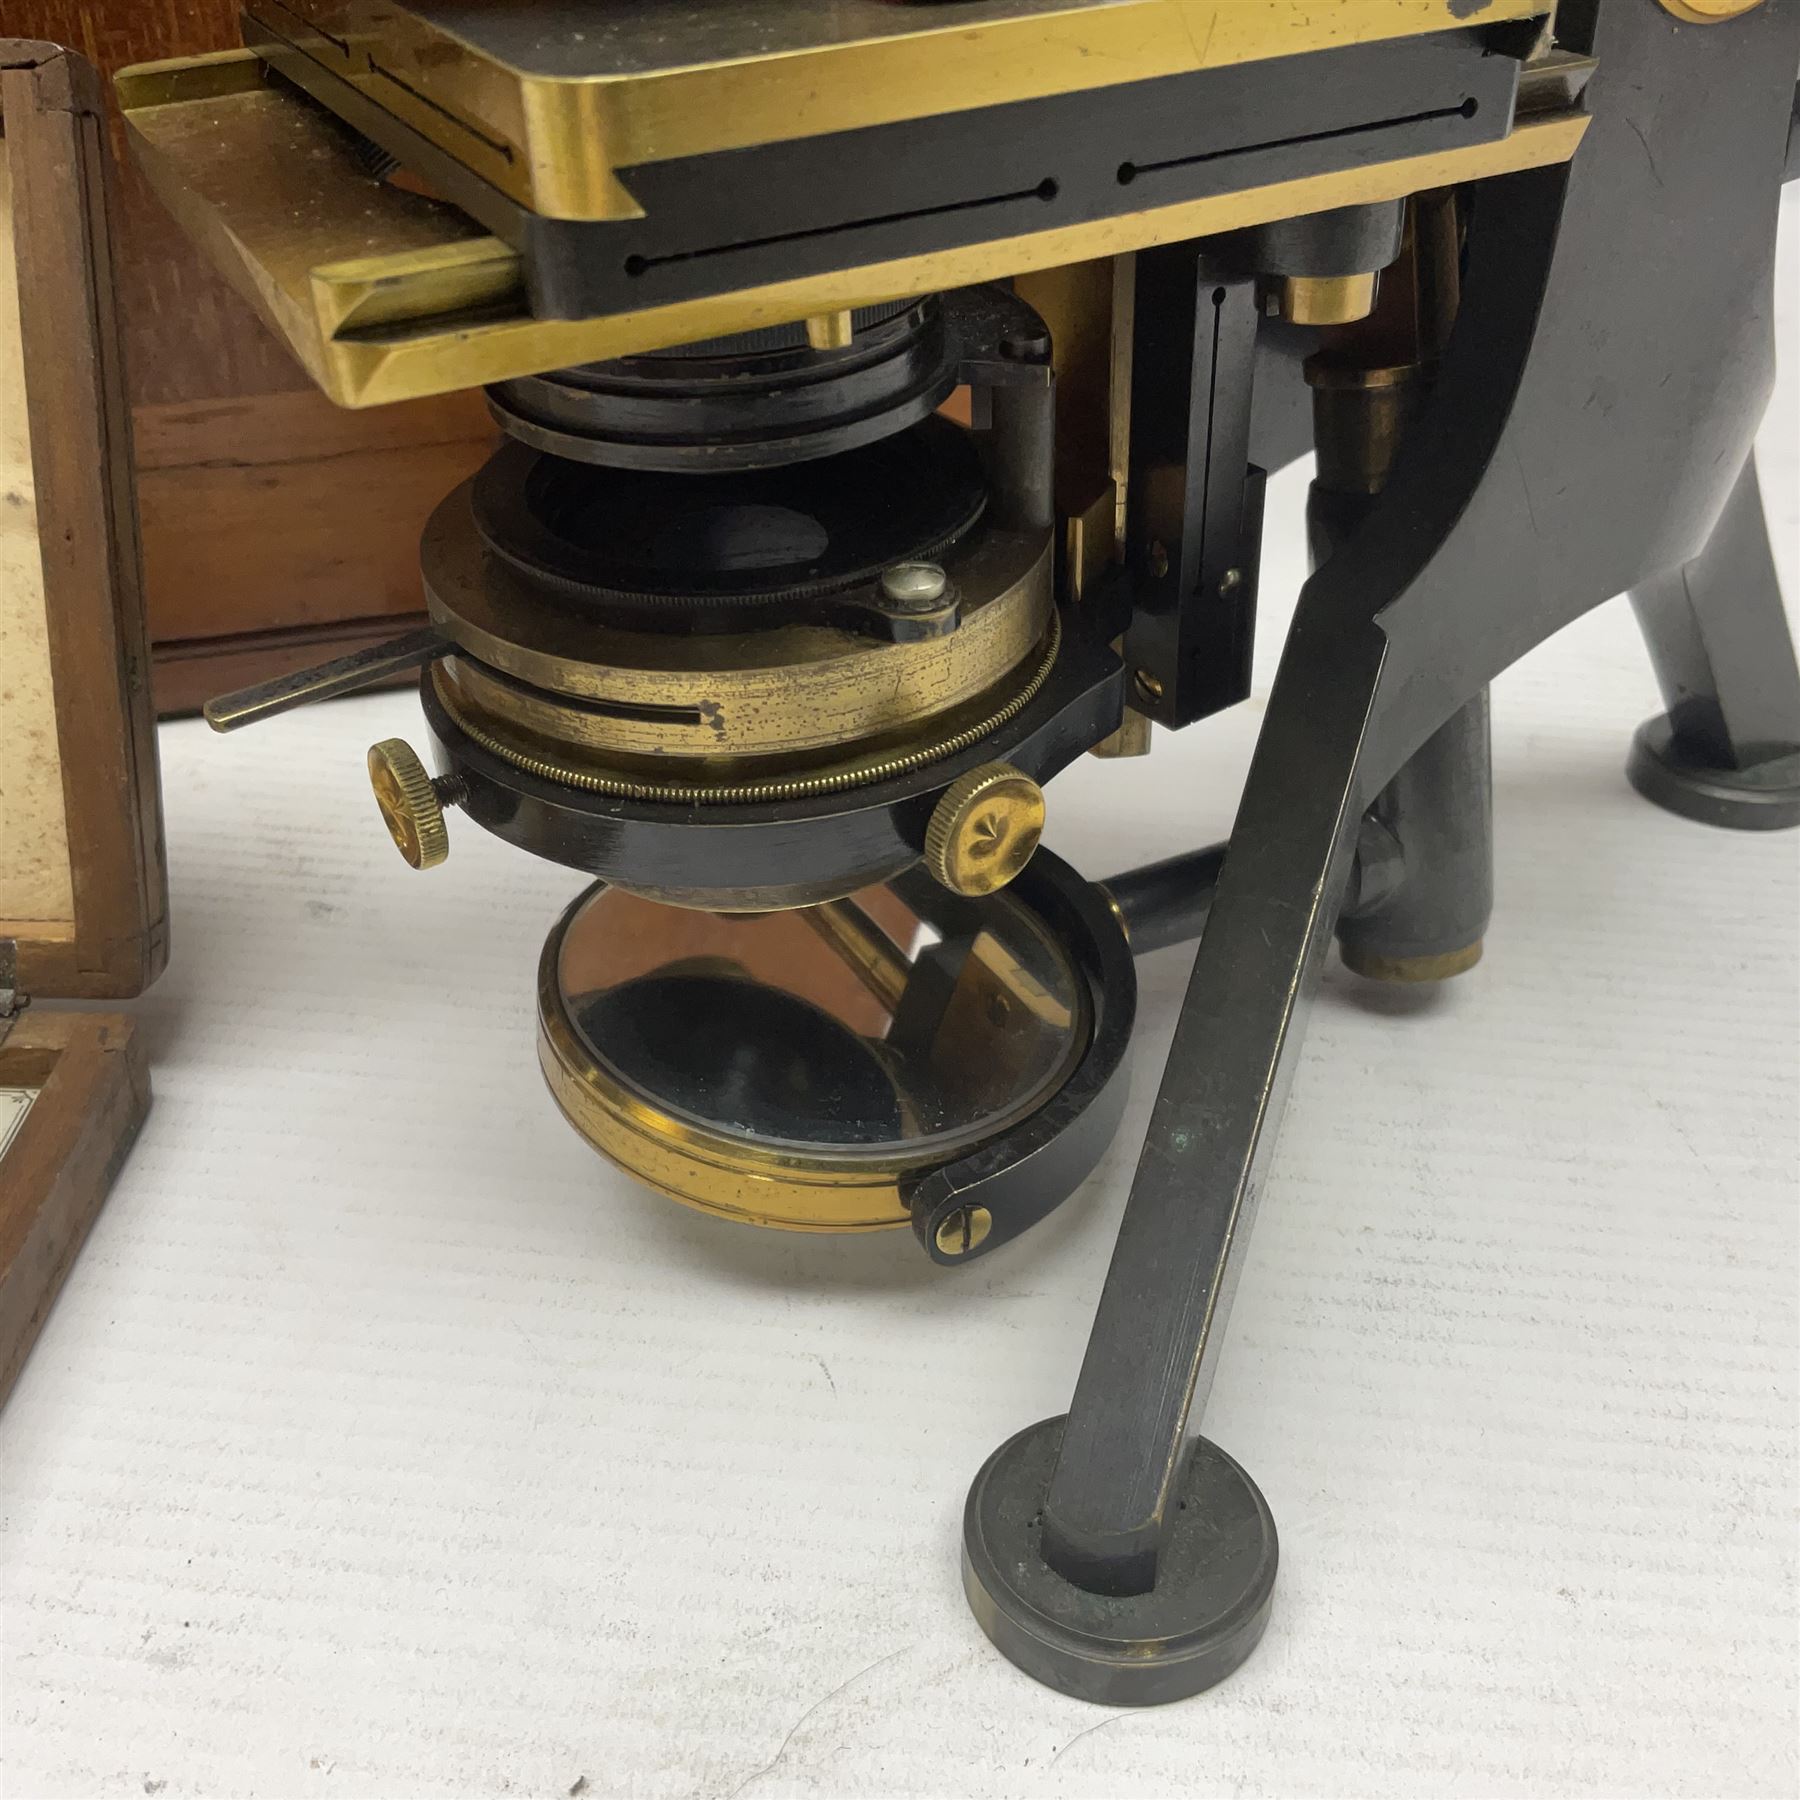 W. Watson & Sons Ltd lacquered brass compound microscope circa 1910 - Image 4 of 11